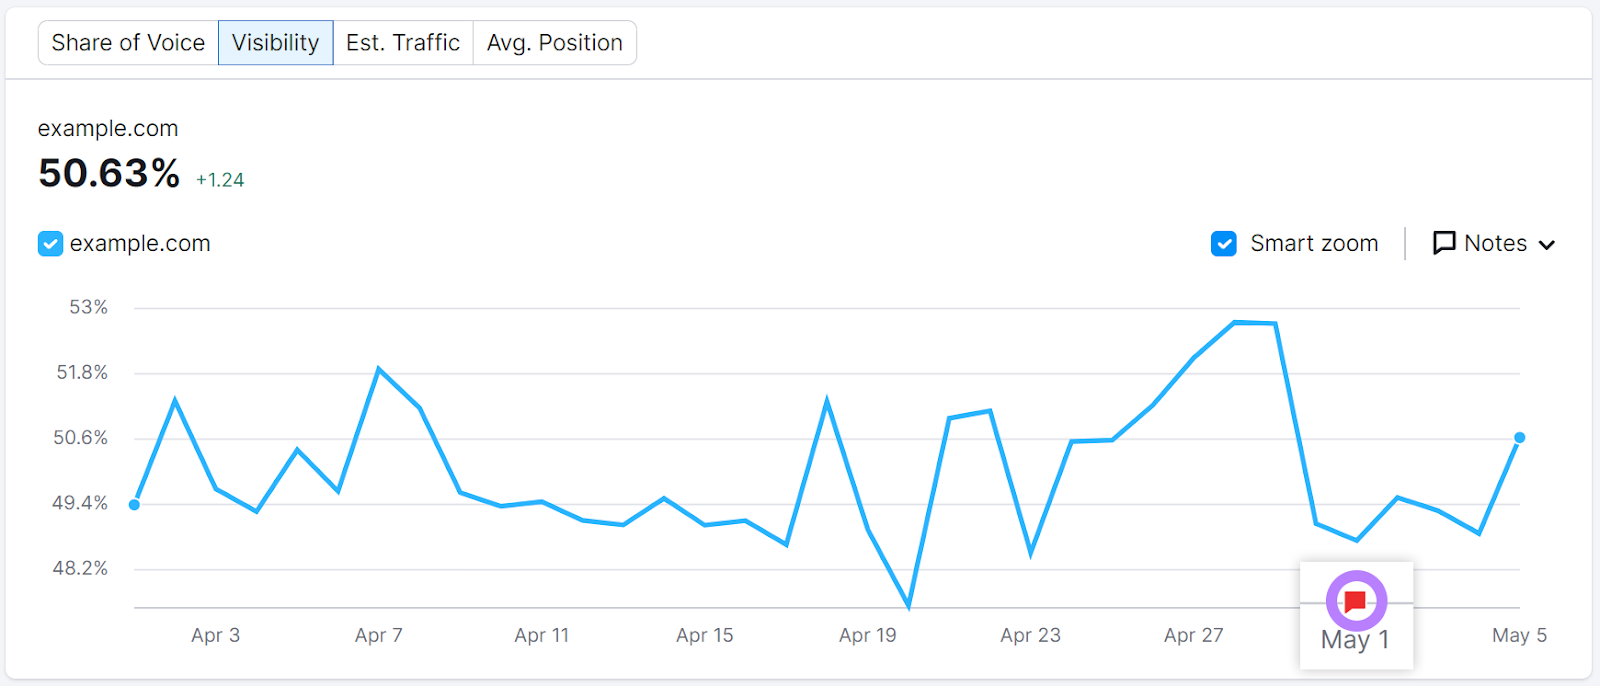 Semrush position tracking report with a small red flag indicating a note.